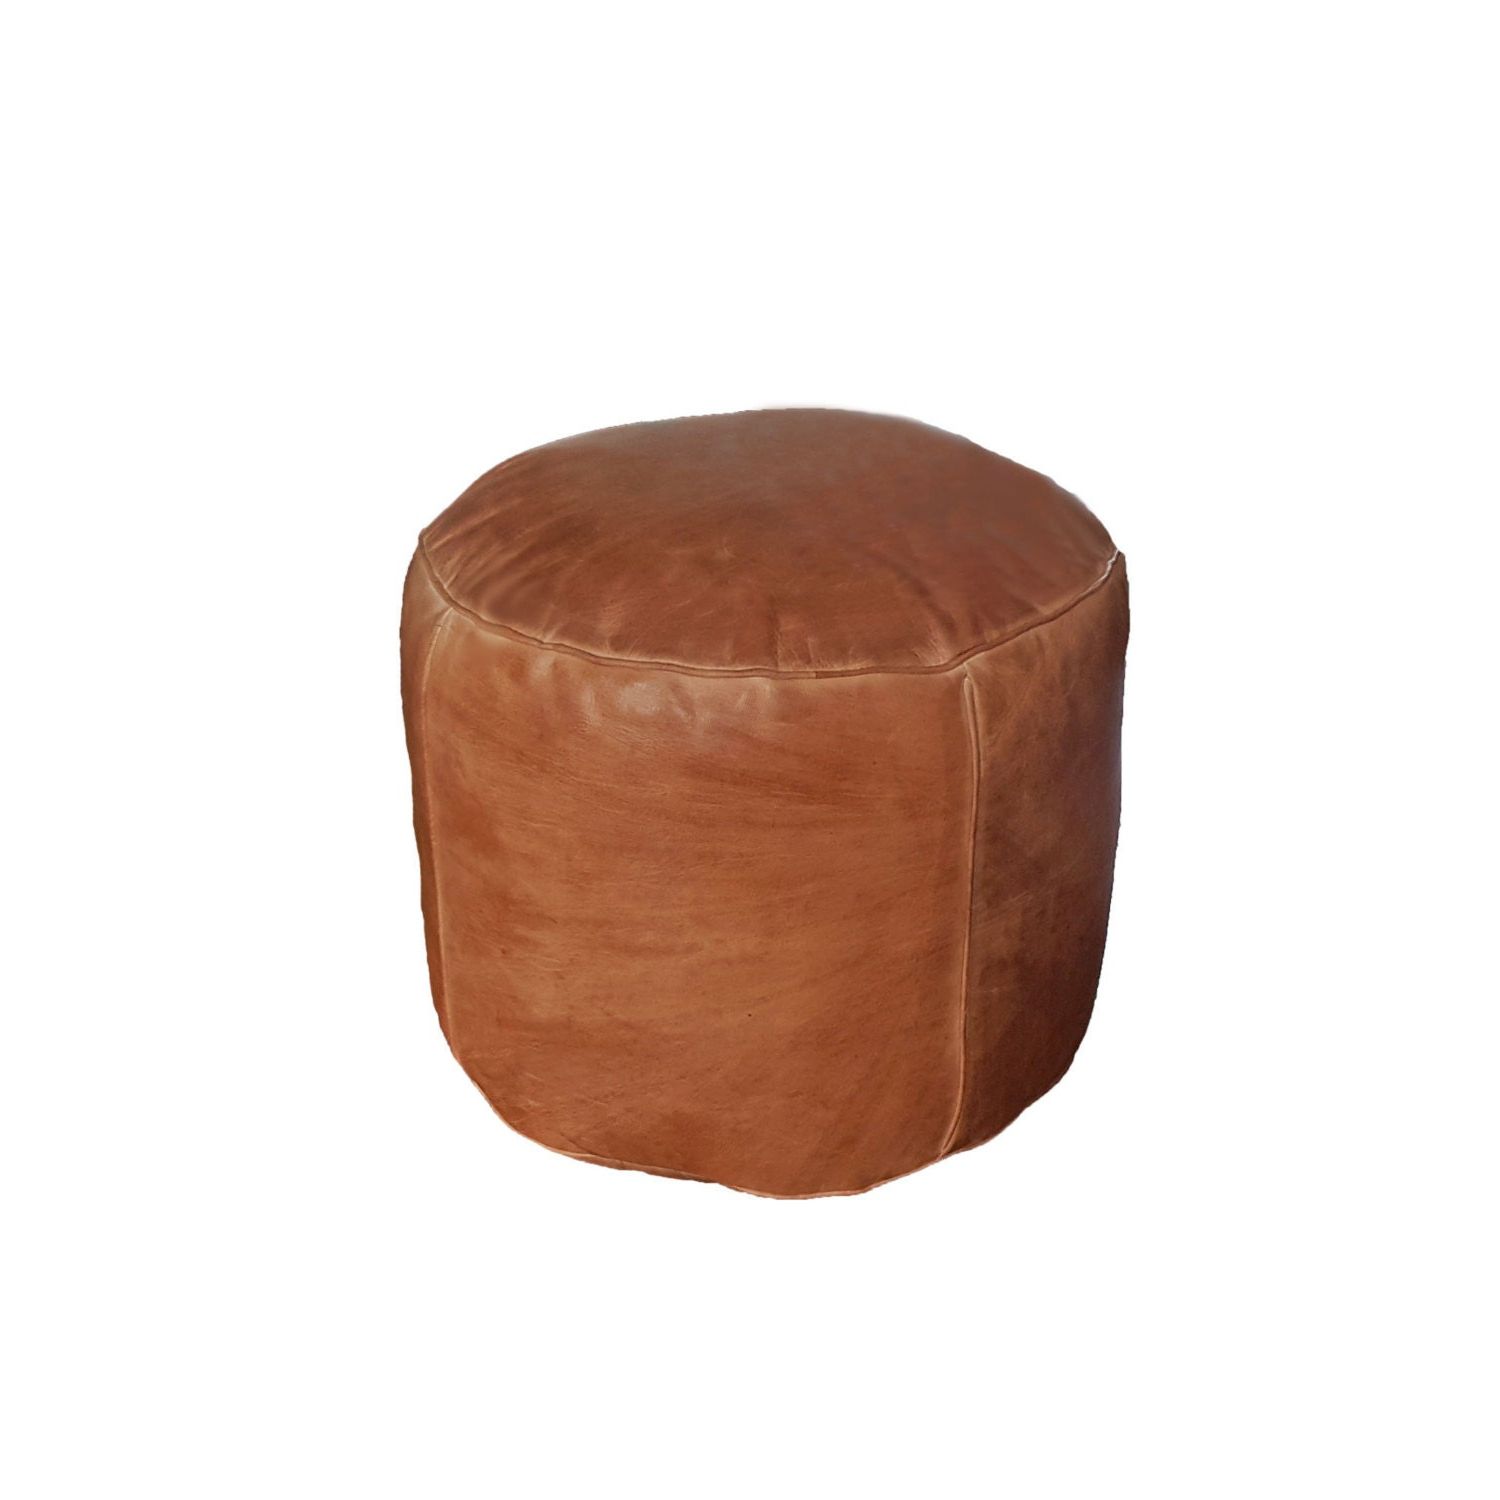 Well Liked Brown Leather Tan Canvas Pouf Ottomans Pertaining To Round Leather Pouf Ottoman Natural Brown Leather (View 4 of 10)